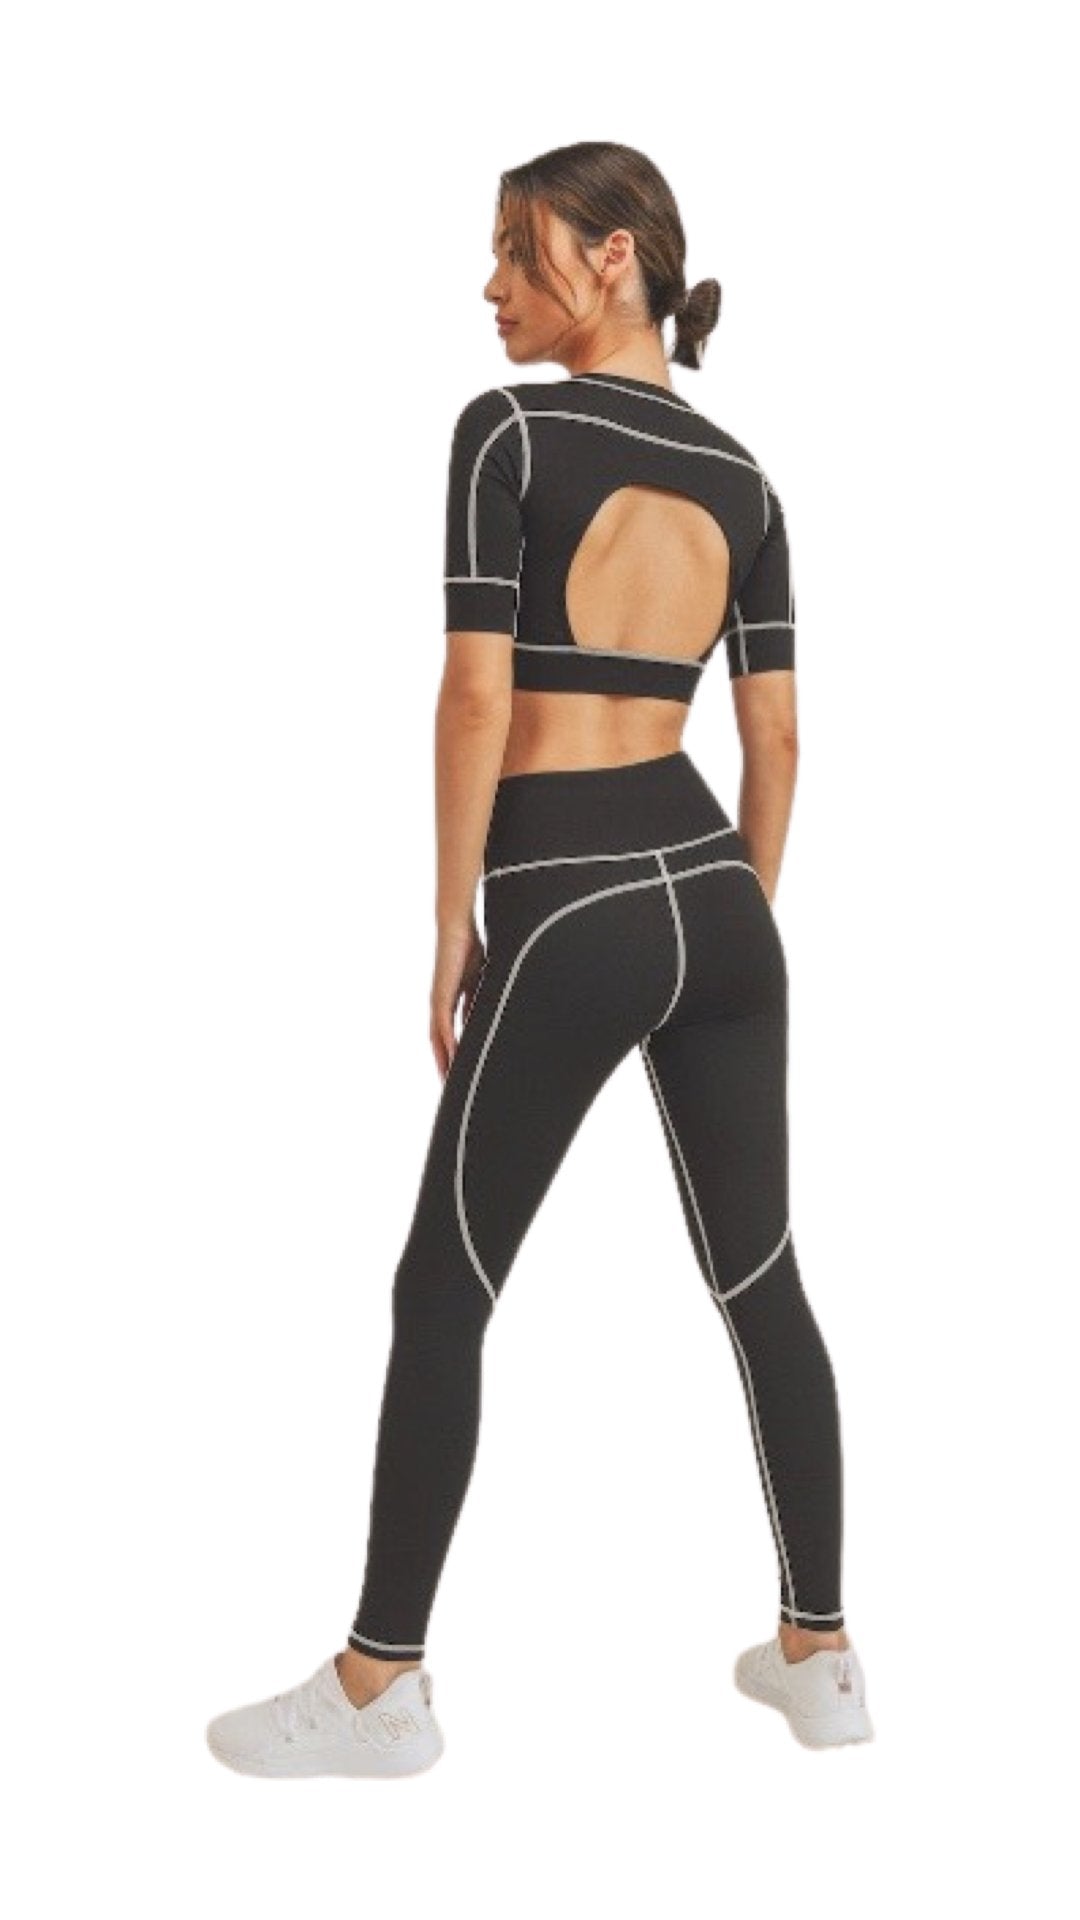 Crop Top with Open Back and Leggings Set Black - Model Express Vancouver